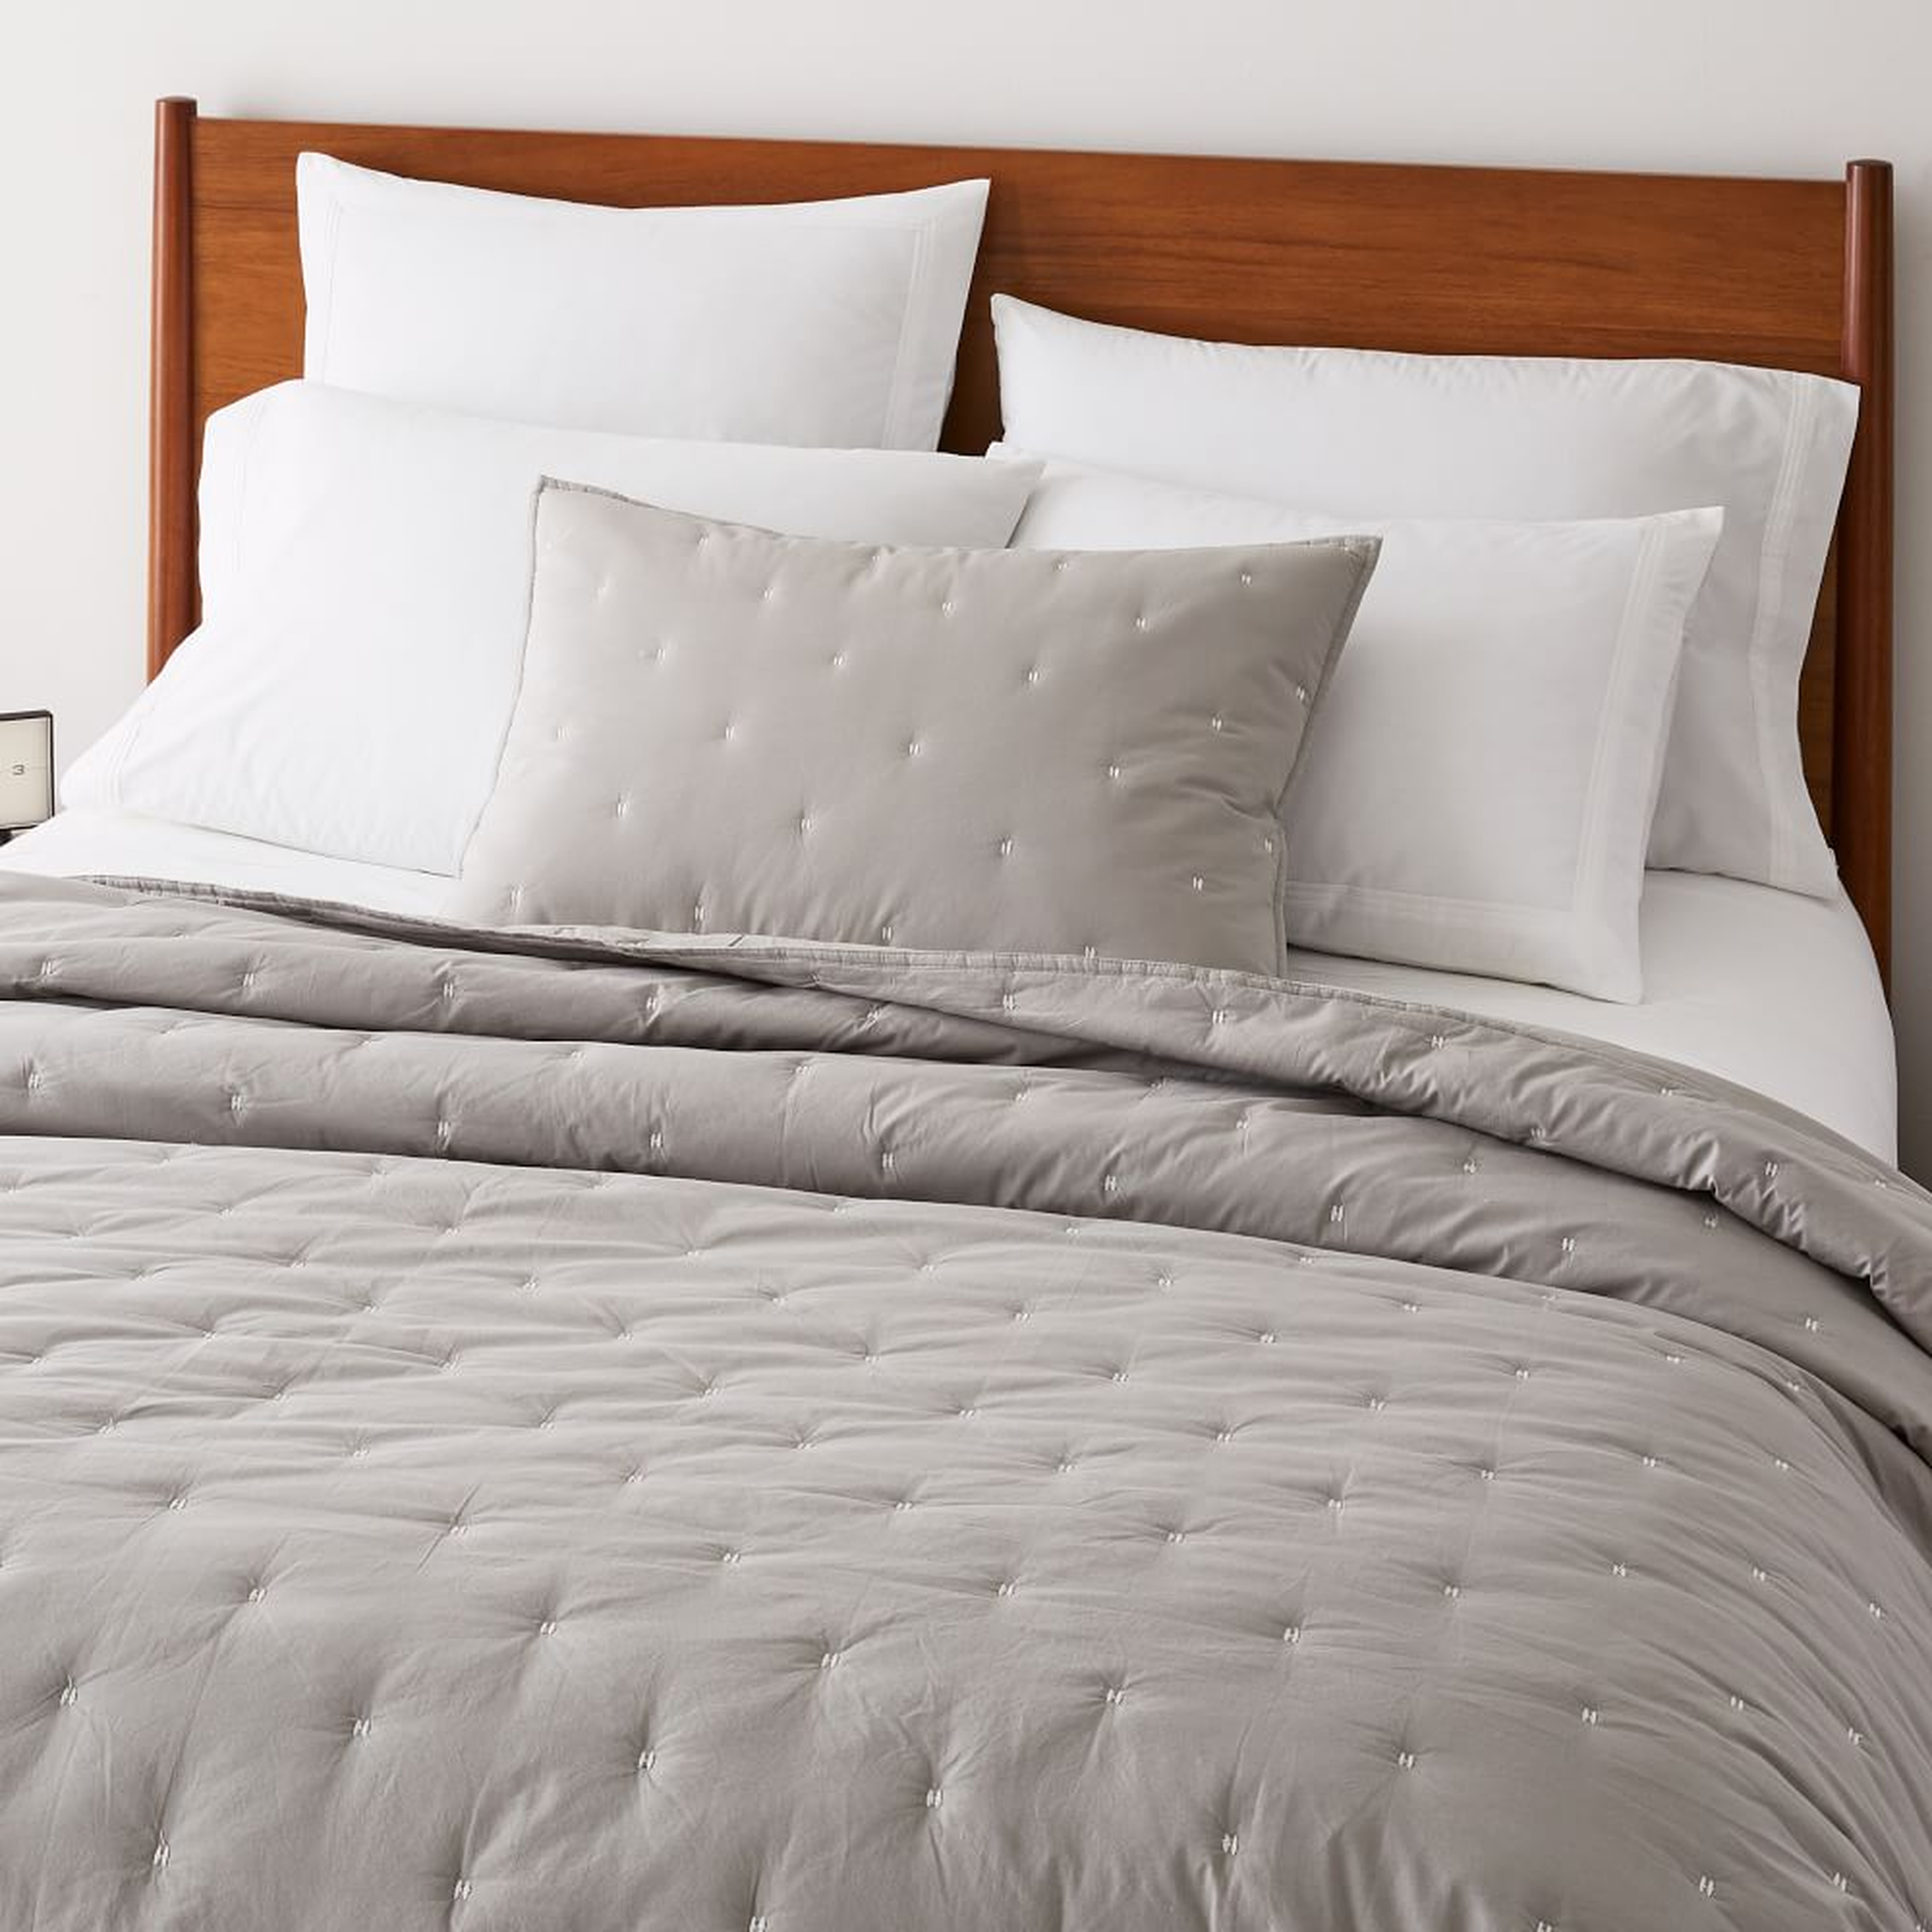 Organic Washed Cotton Quilt, Full/Queen, Pearl Gray - West Elm